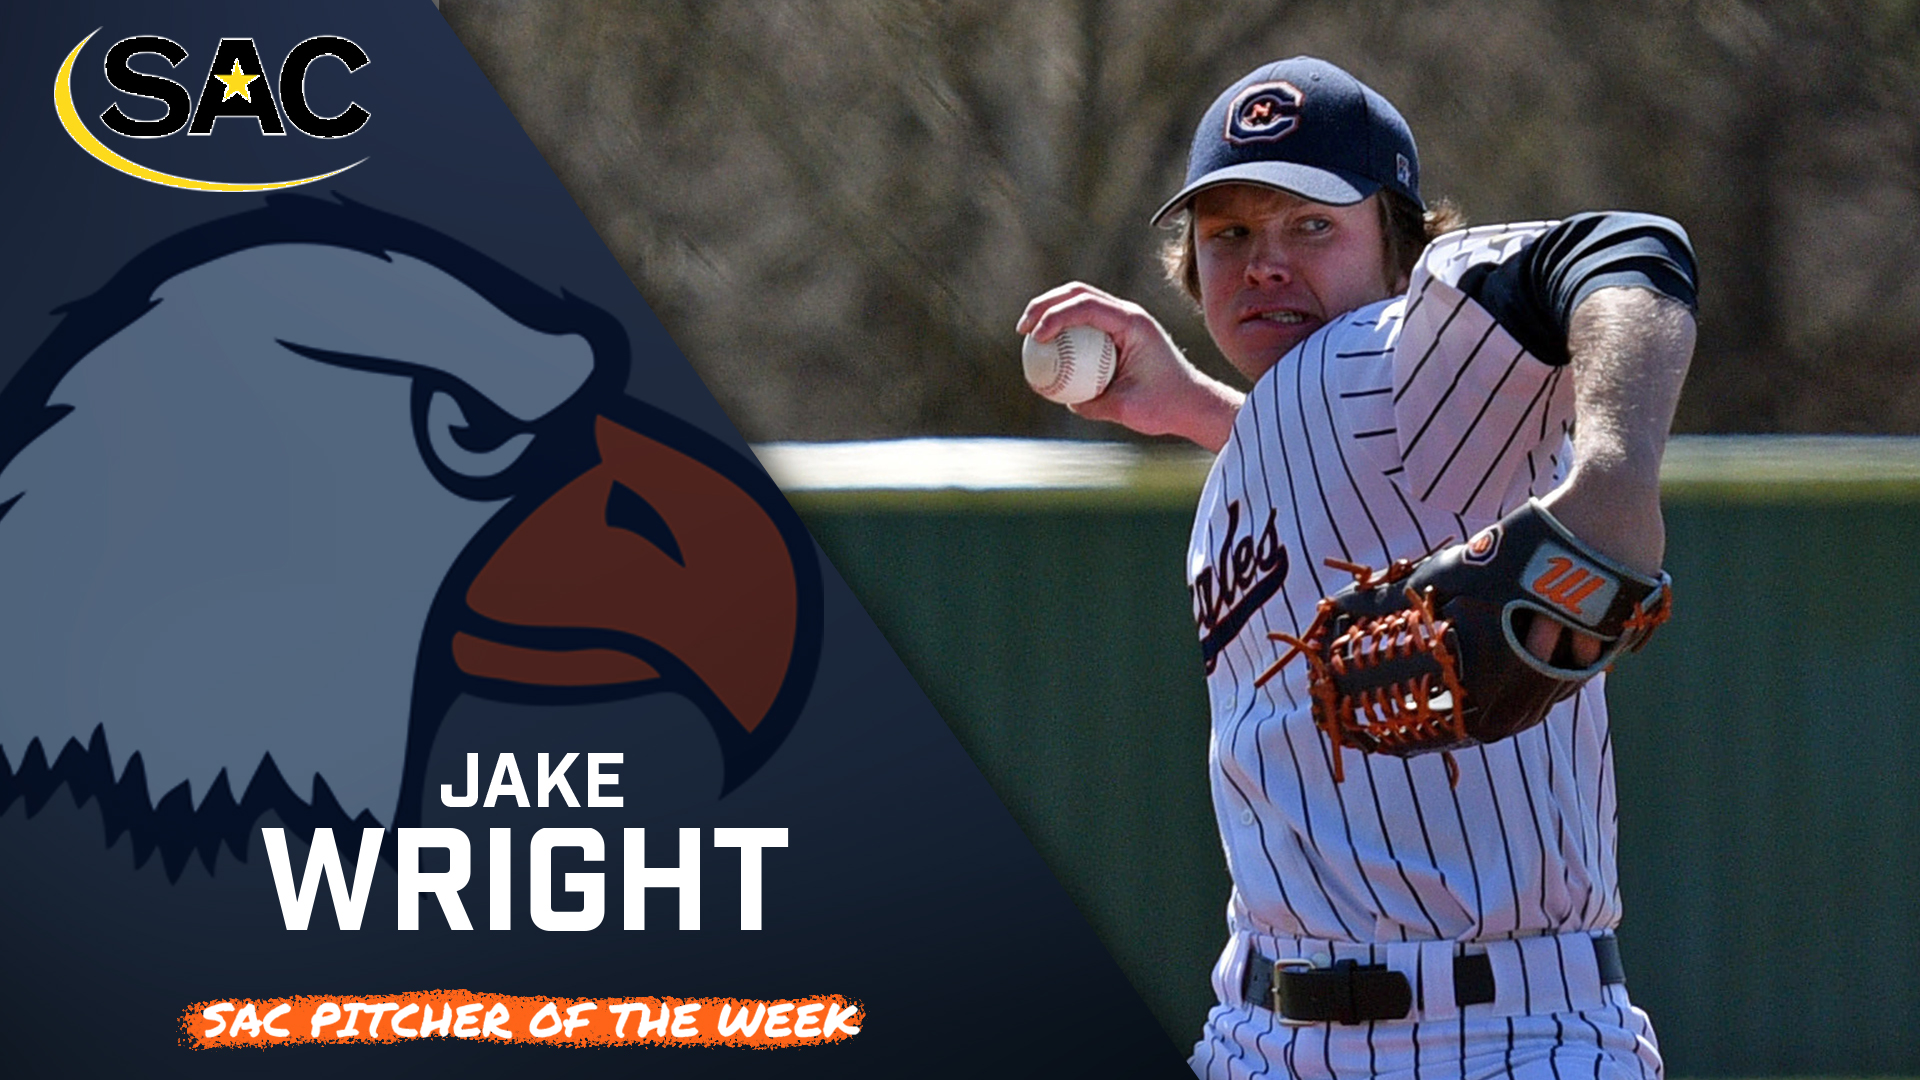 Wright cashes in SAC Pitcher of the Week